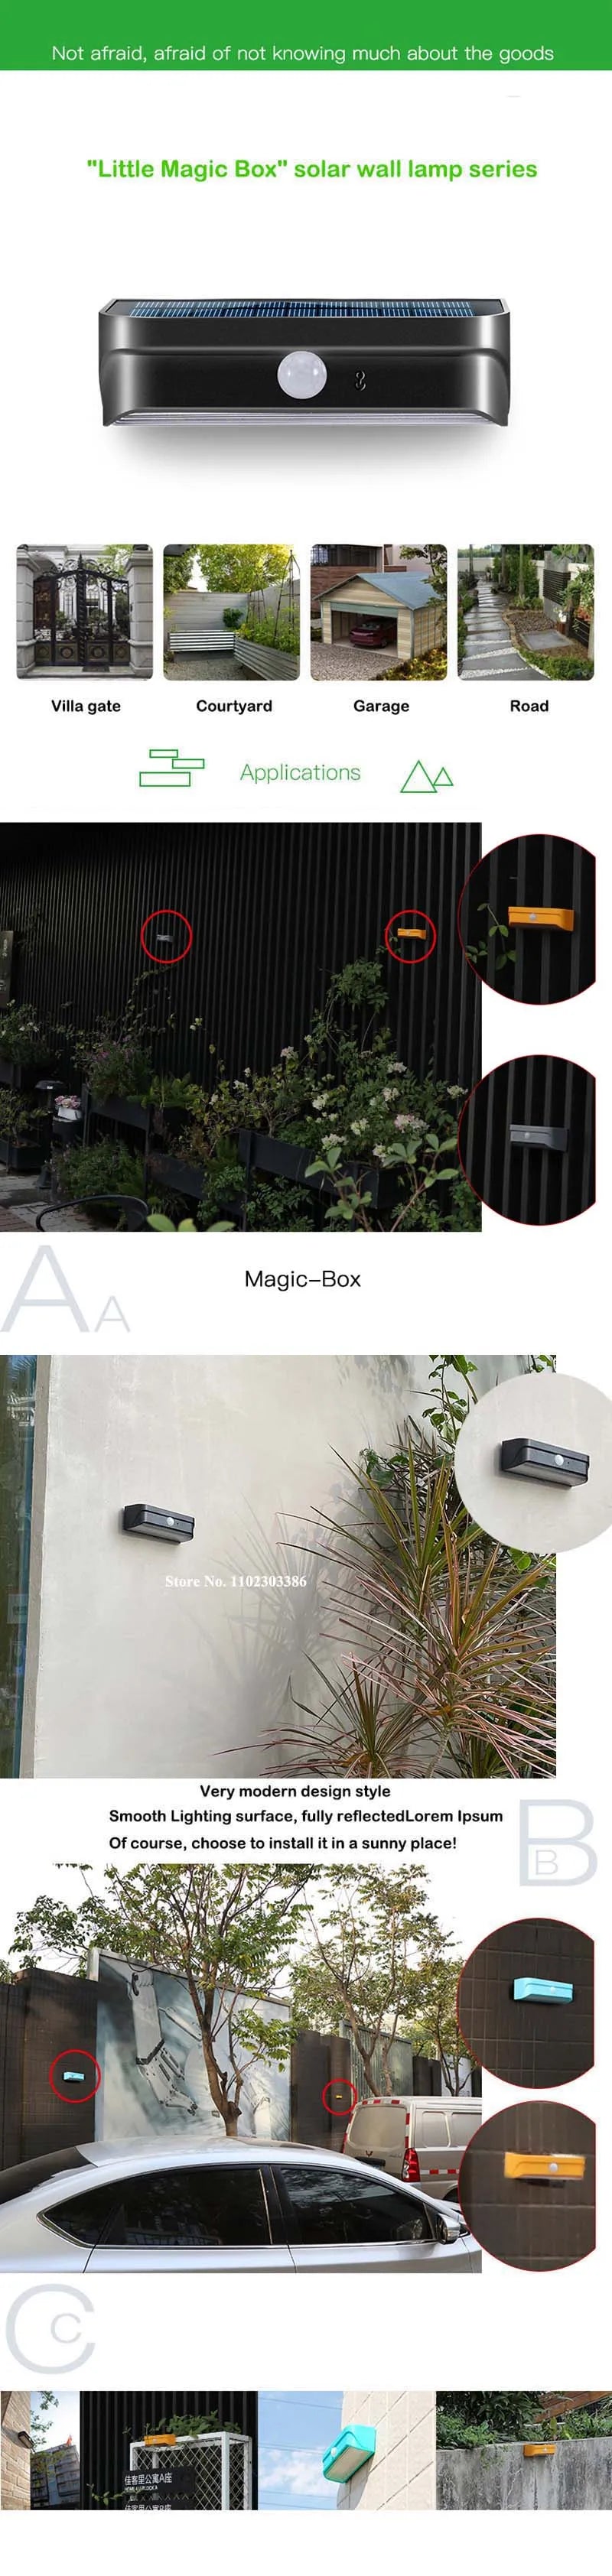 Motion Sensor LED Solar Light, Solar-powered lights with sleek design and smooth surface for outdoor use.